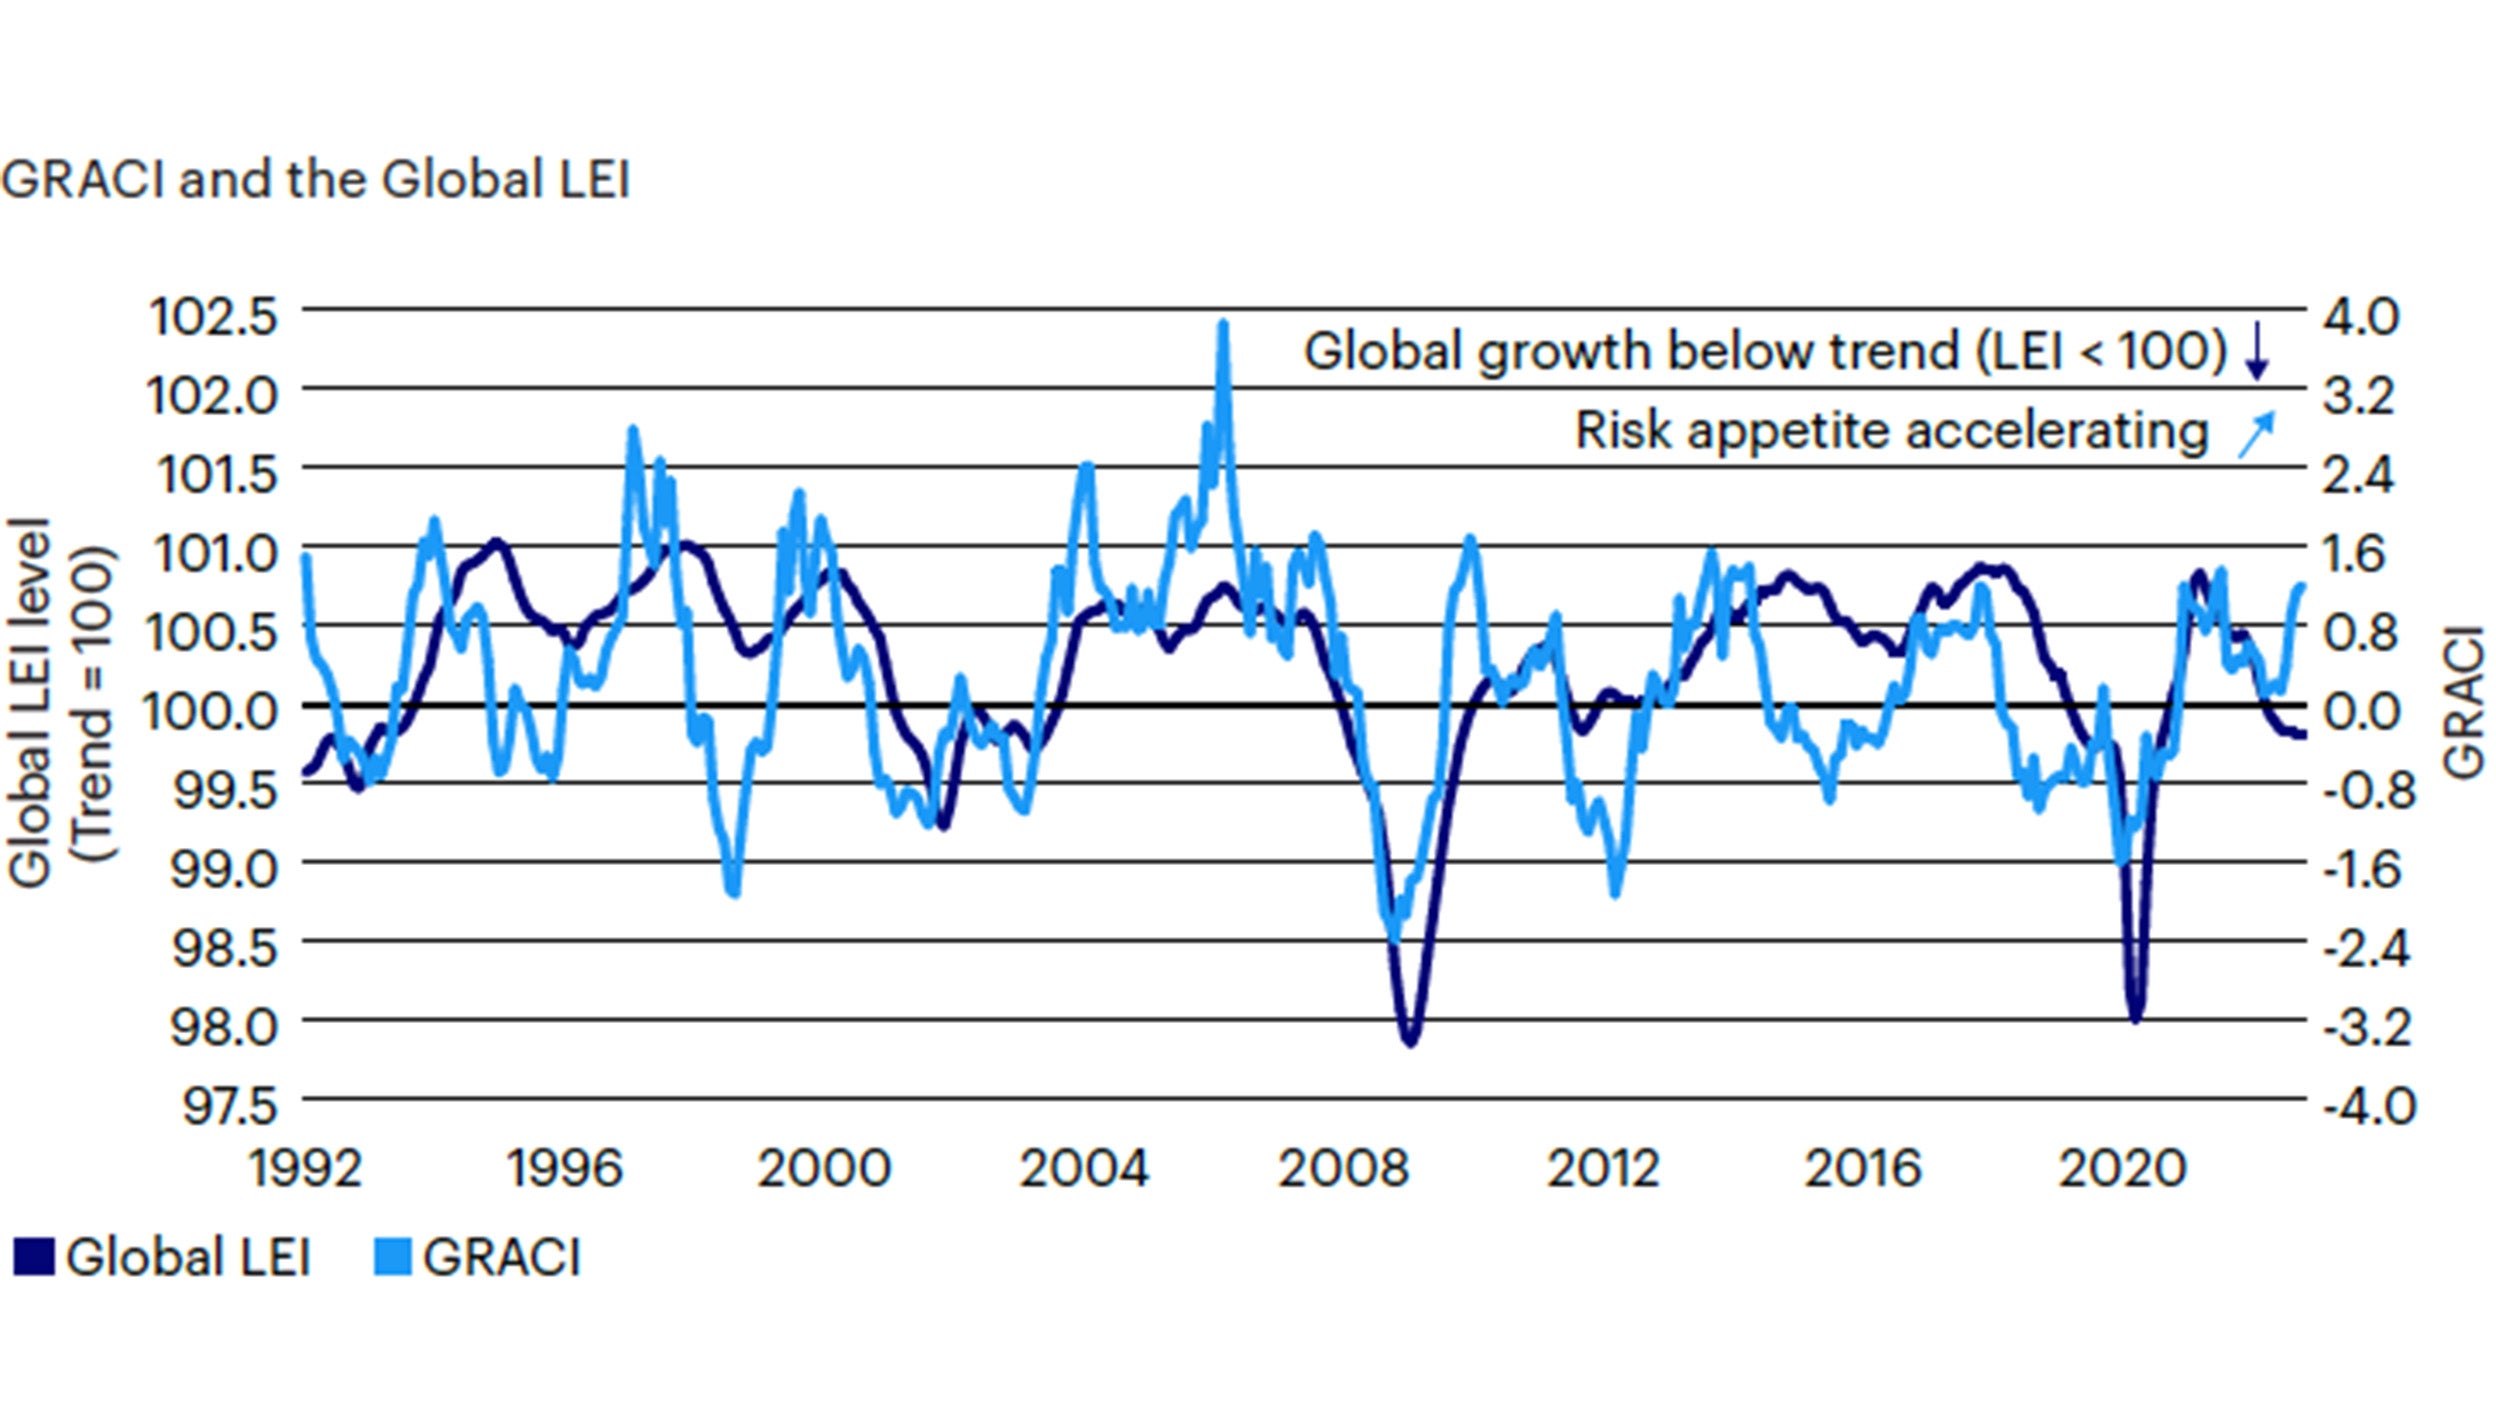 Figure 2: Market sentiment continues to improve, confirming near-term prospects of a recovery